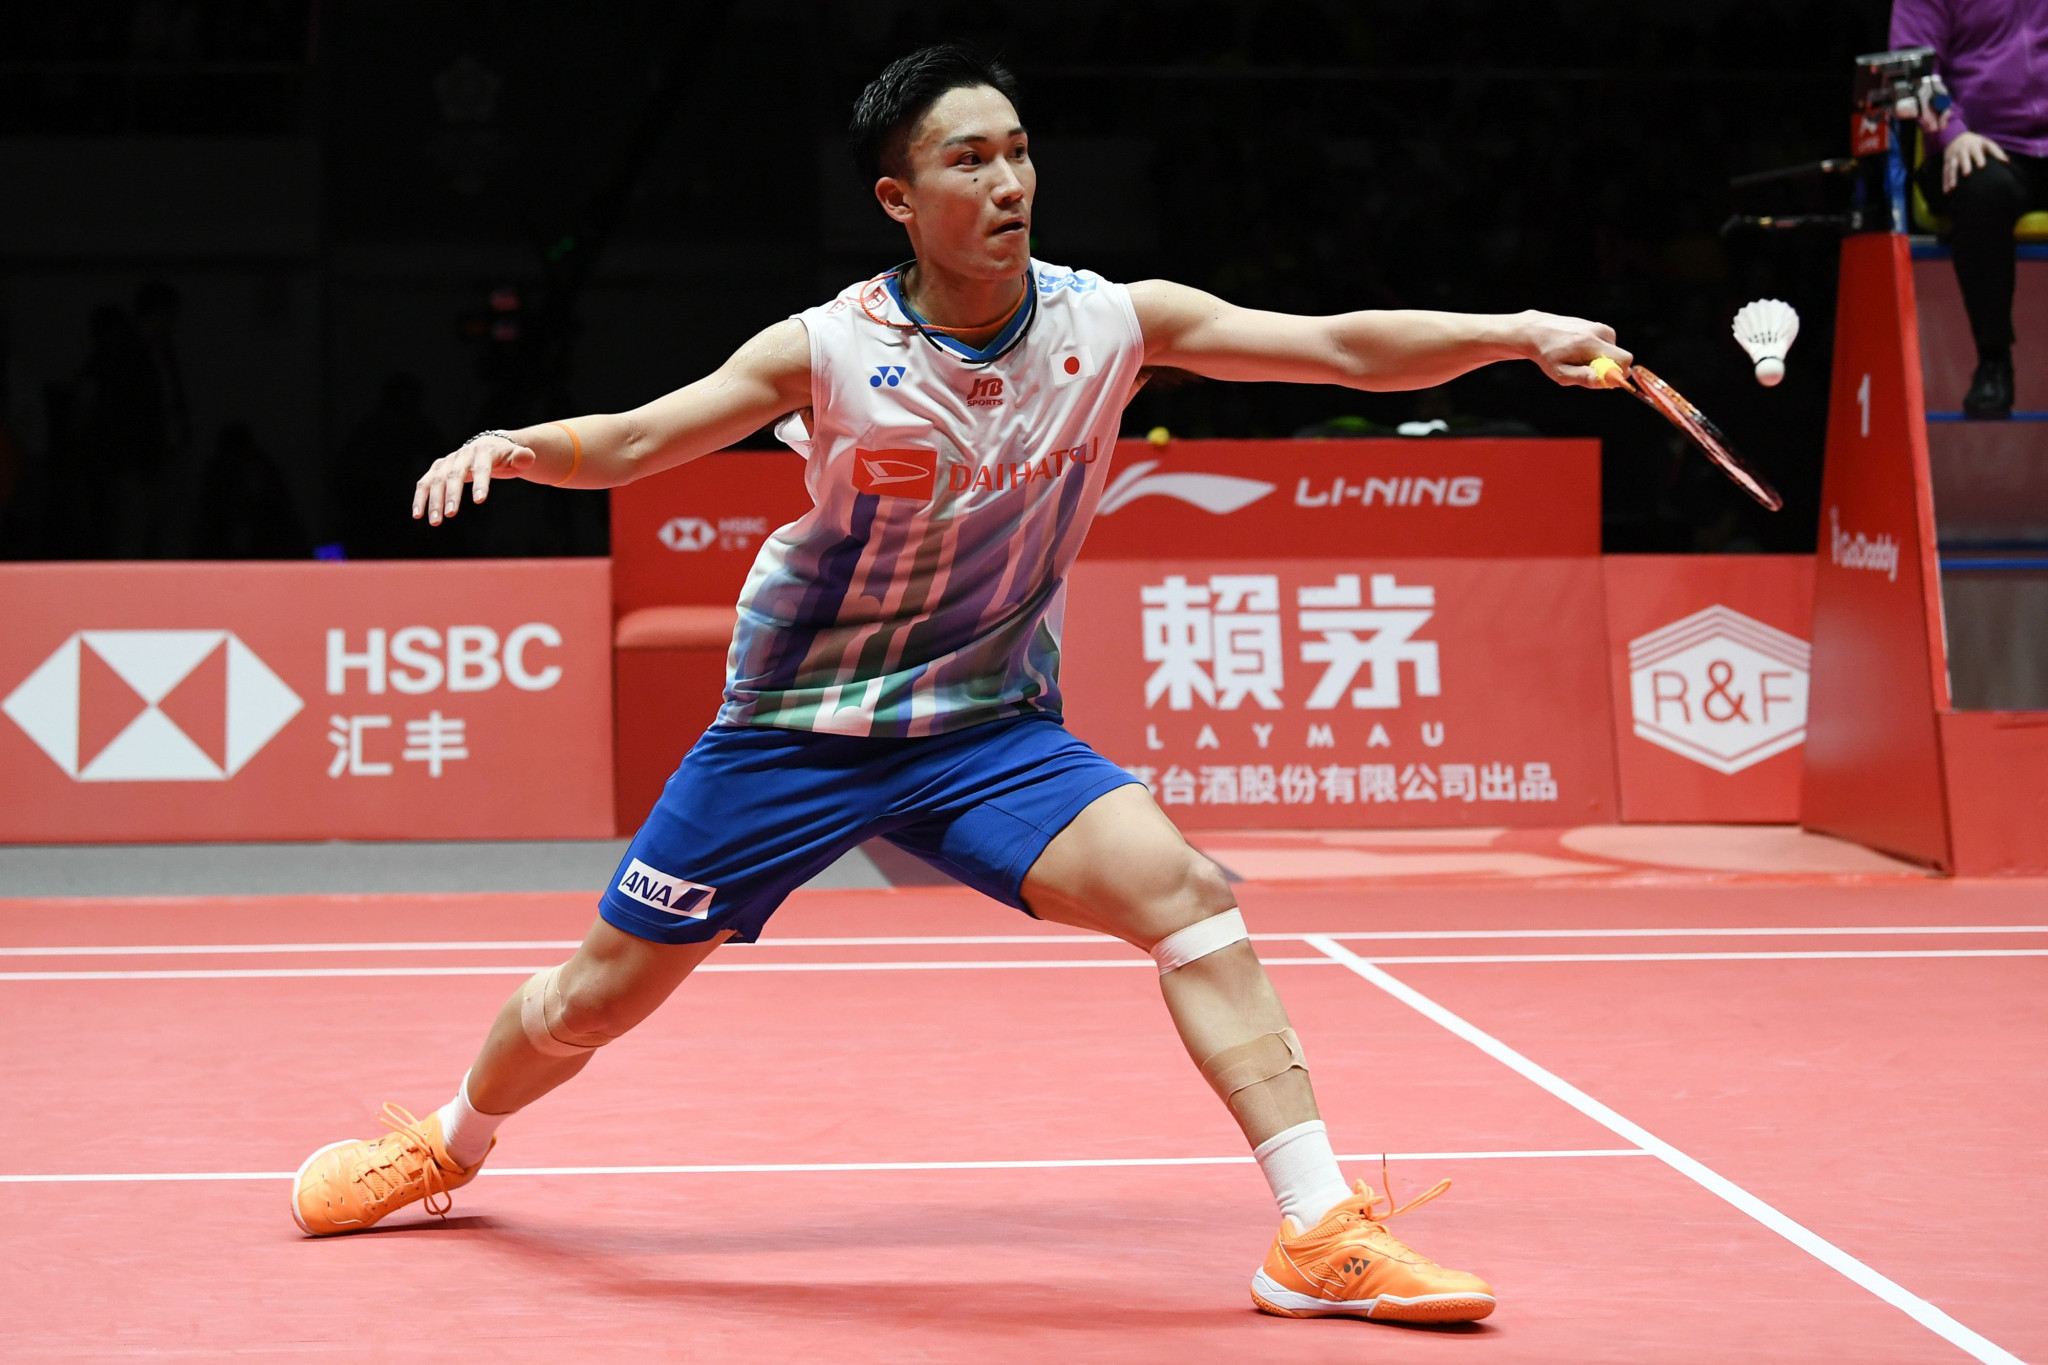 Reigning world champion Kento Momota was among the players to progress to the second round of the men's singles event ©Getty Images